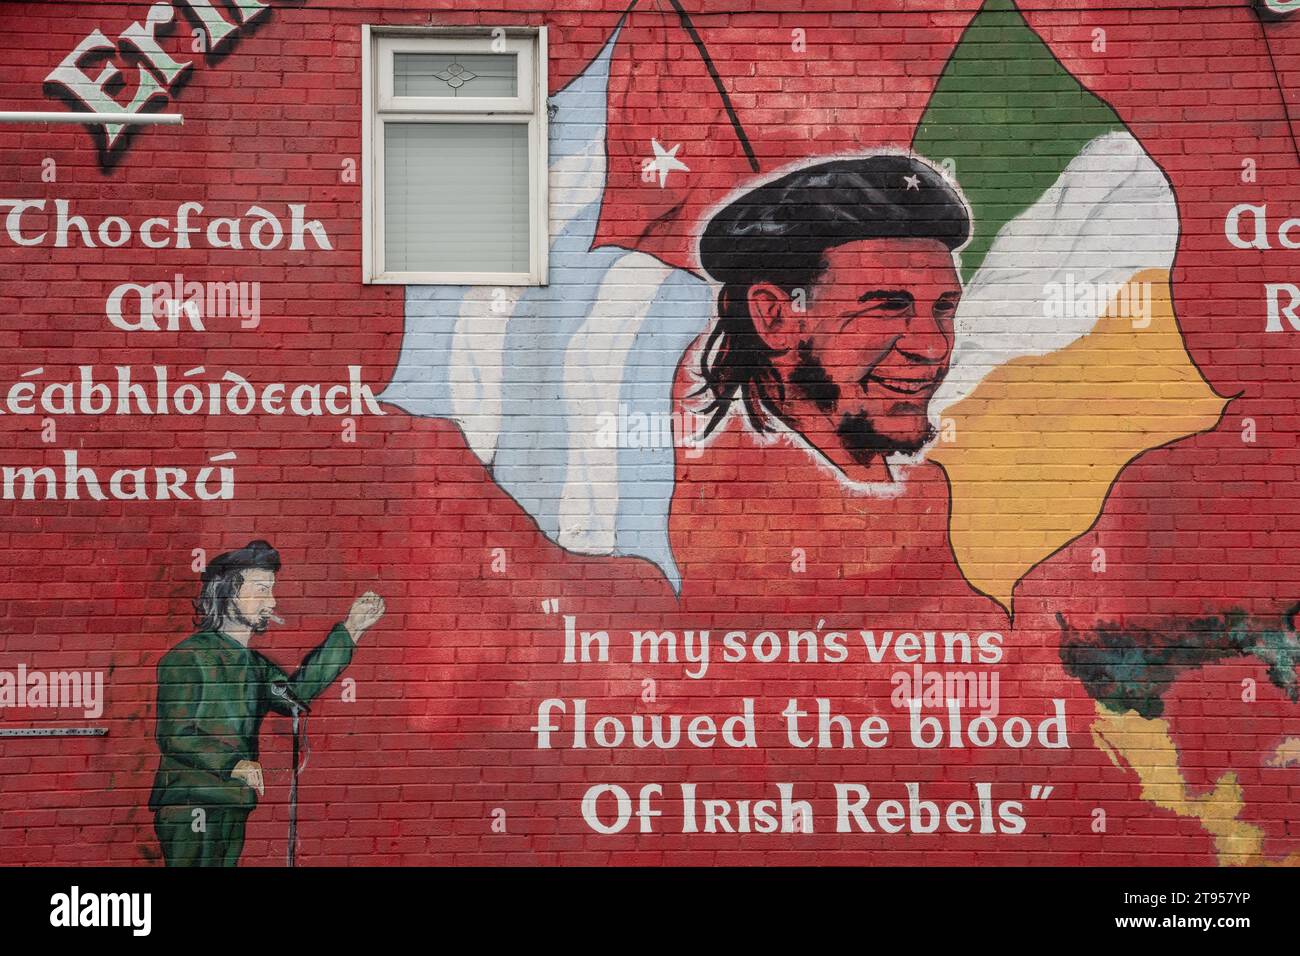 Mural s made by Republican street artists commemorating the struggle against the British in the streets of Derry, North Ireland, Europe Stock Photo